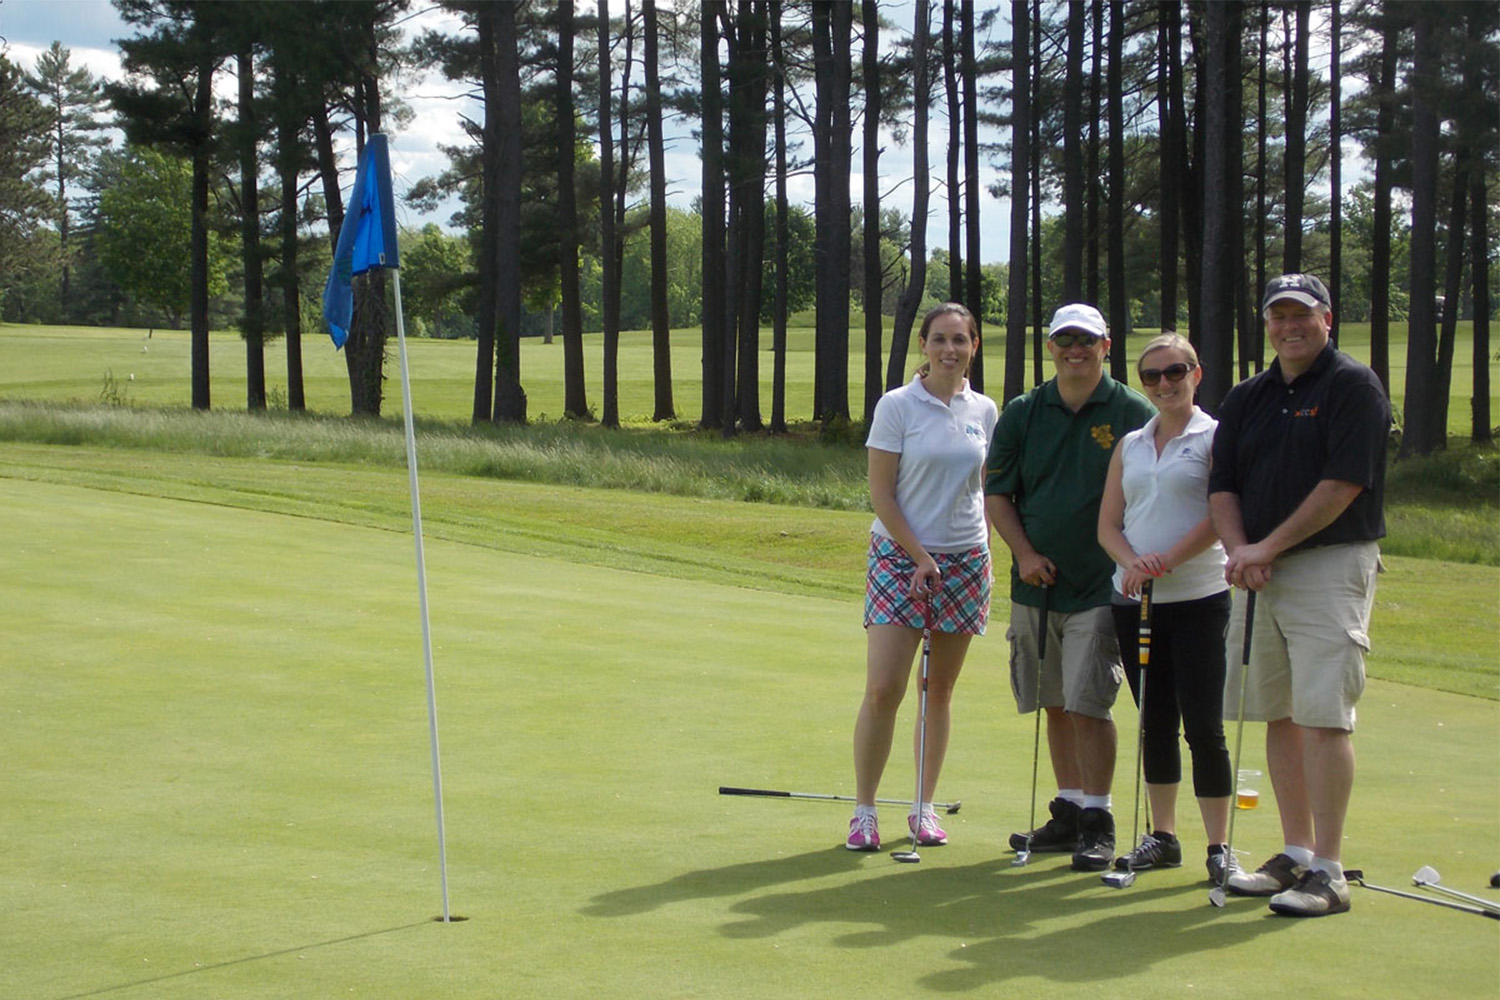 4 Tocci employees pose for group photo on the golf course 